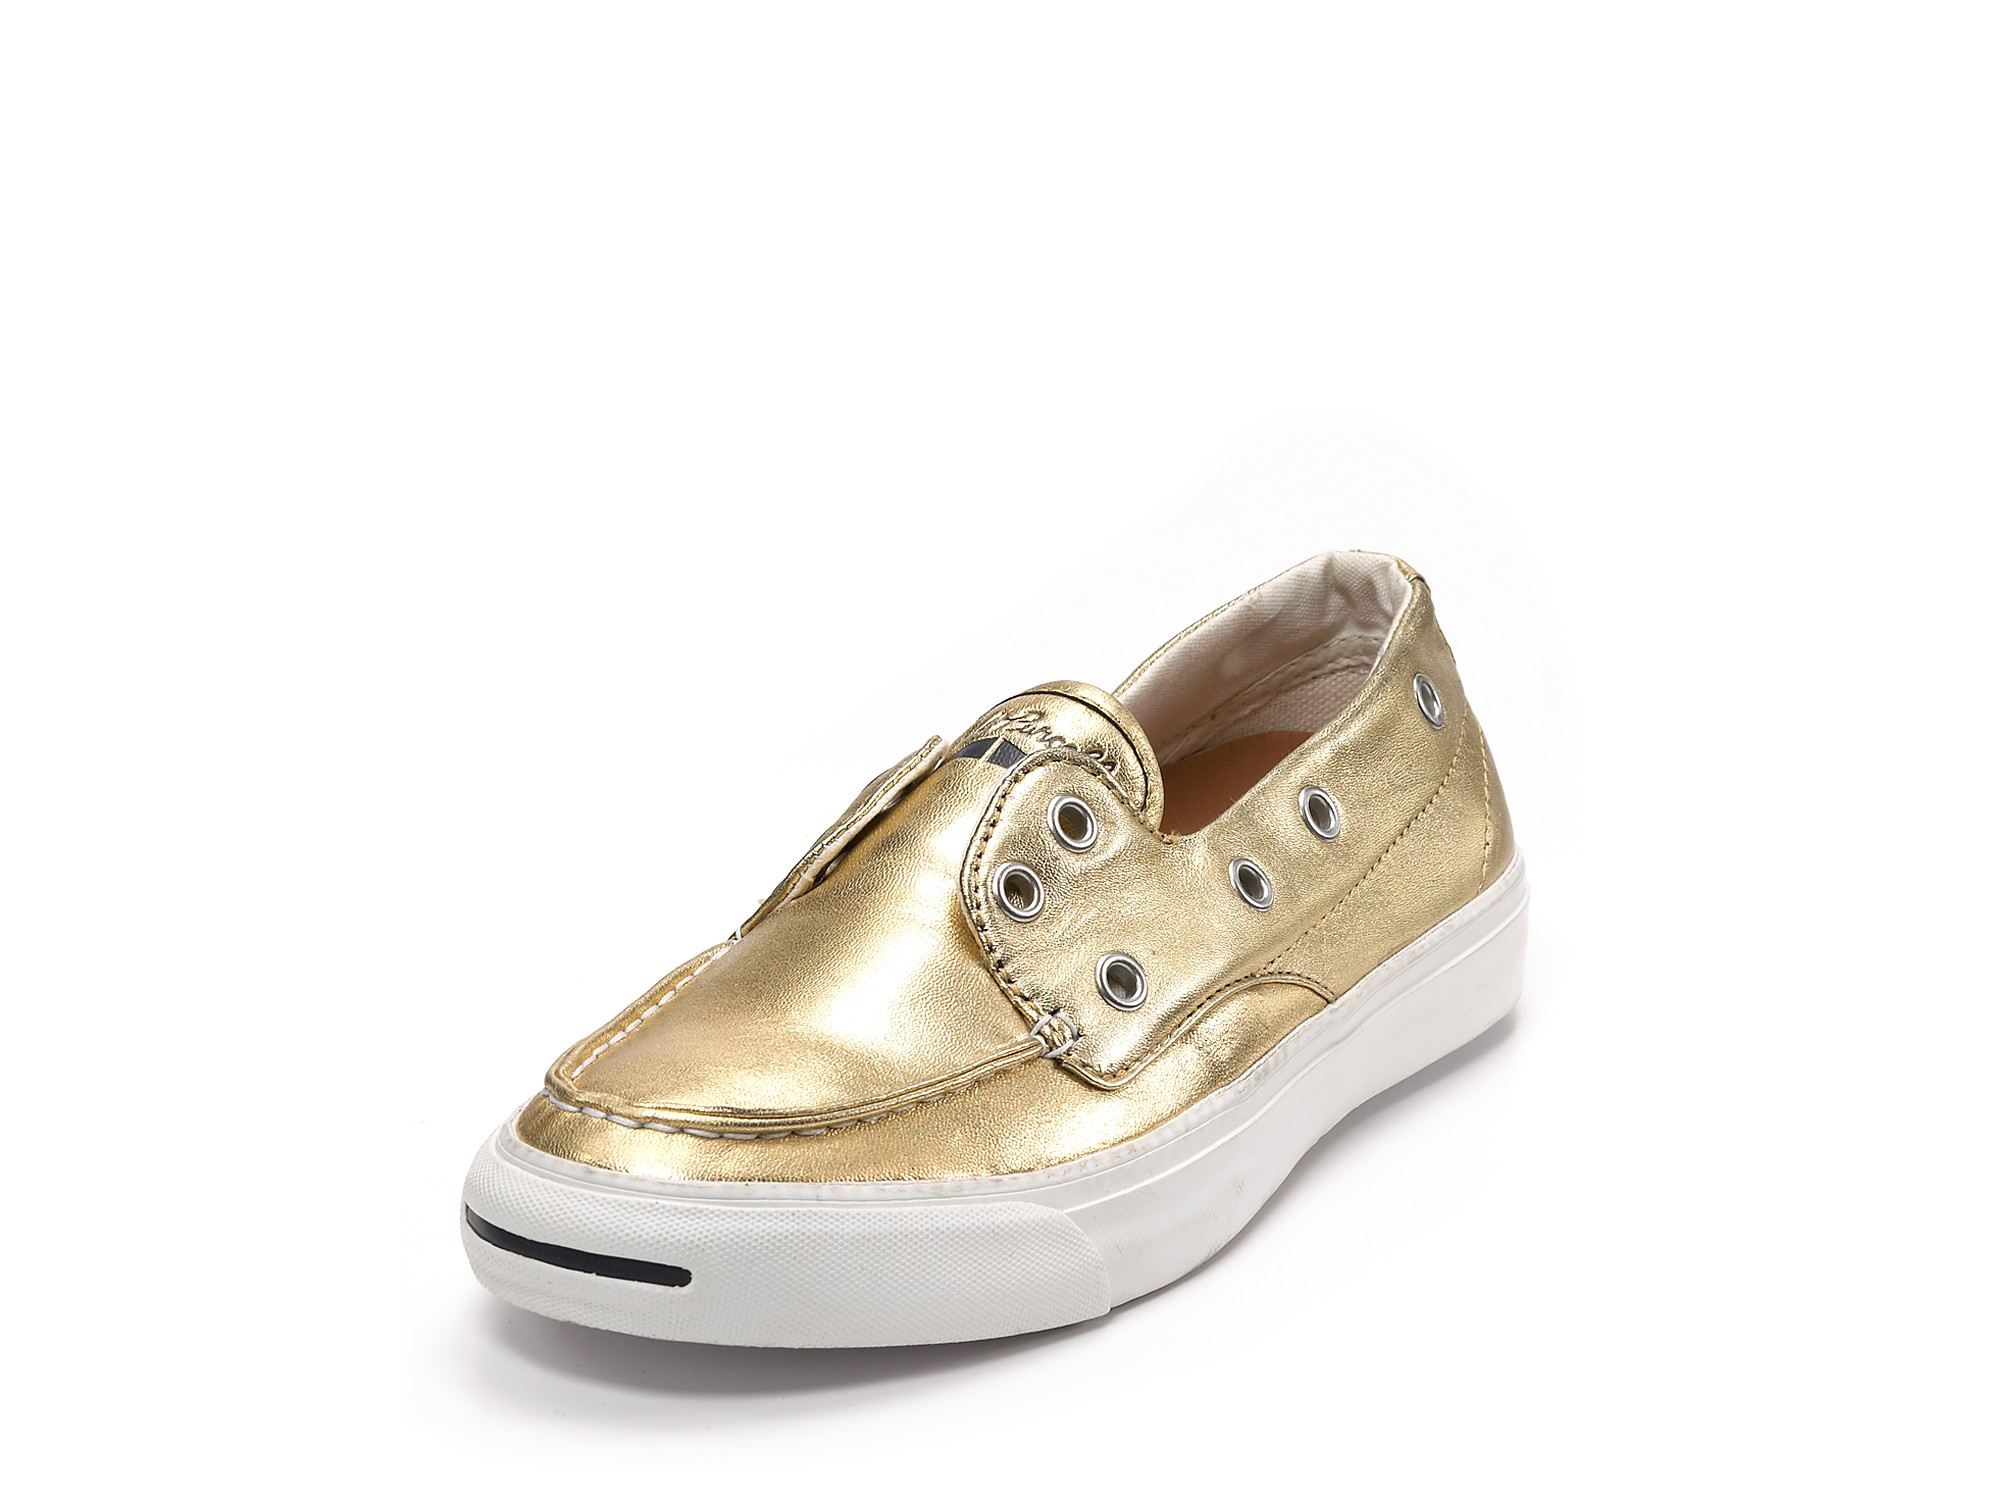 Converse Jack Purcell Boat Shoes in Gold | Lyst